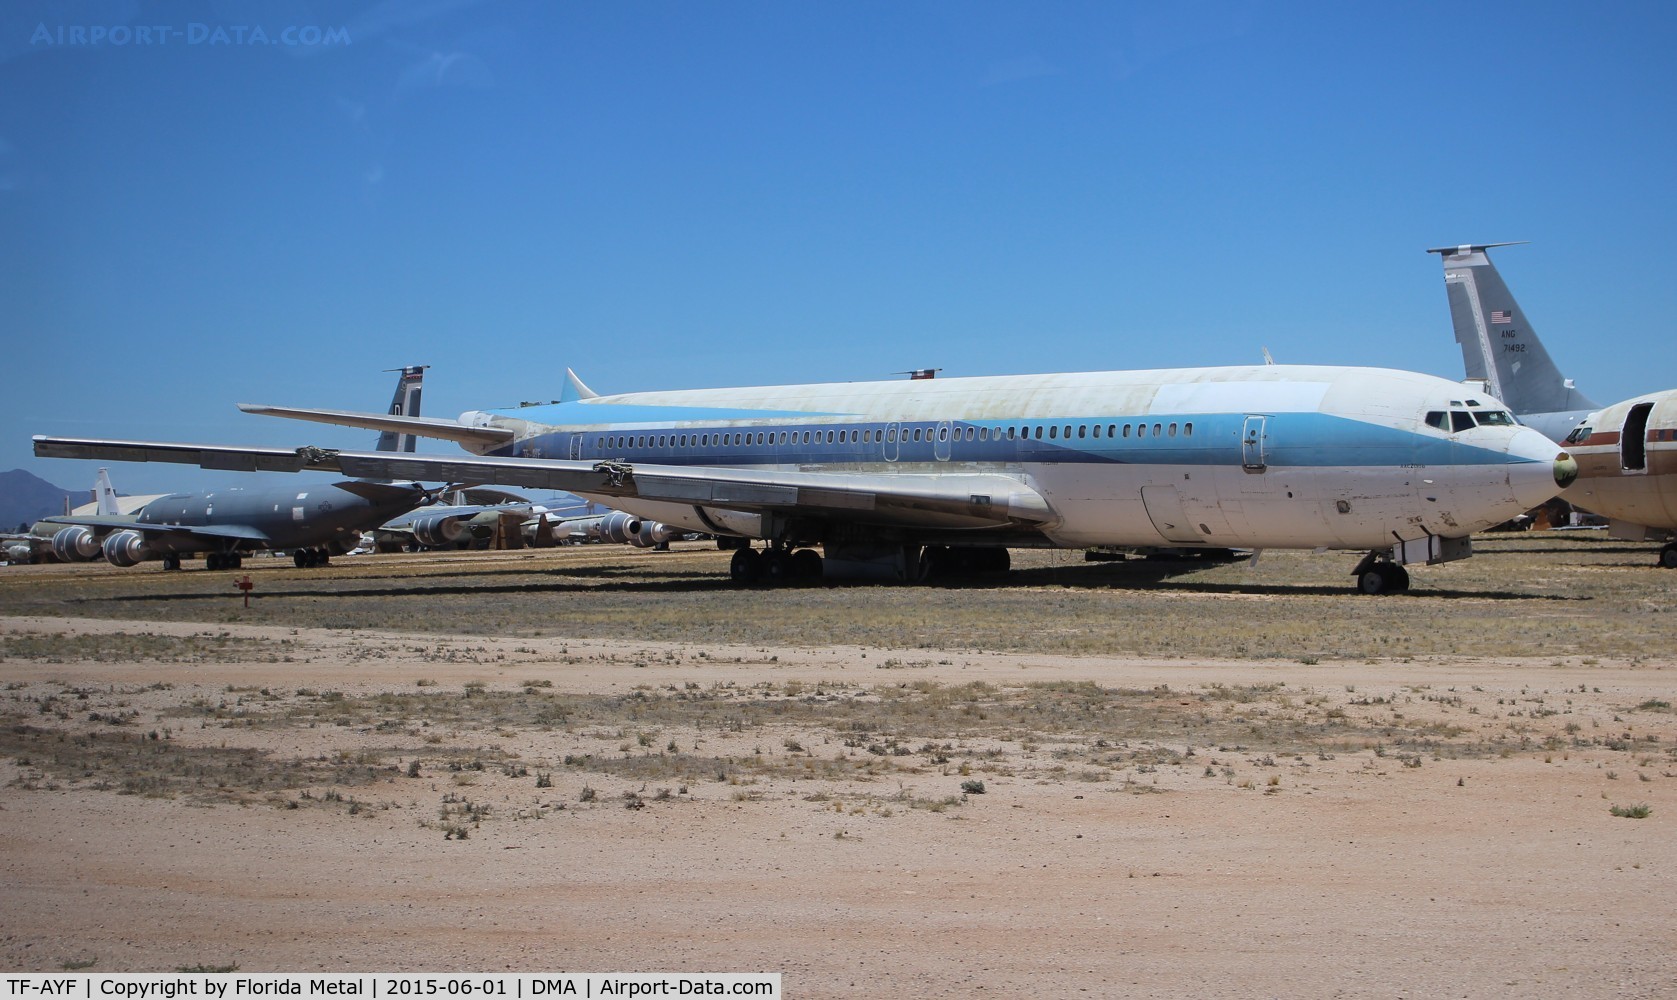 TF-AYF, 1988 Boeing 707-358B C/N 20097, Ex El Al 707-300 being used for parts for KC-135s